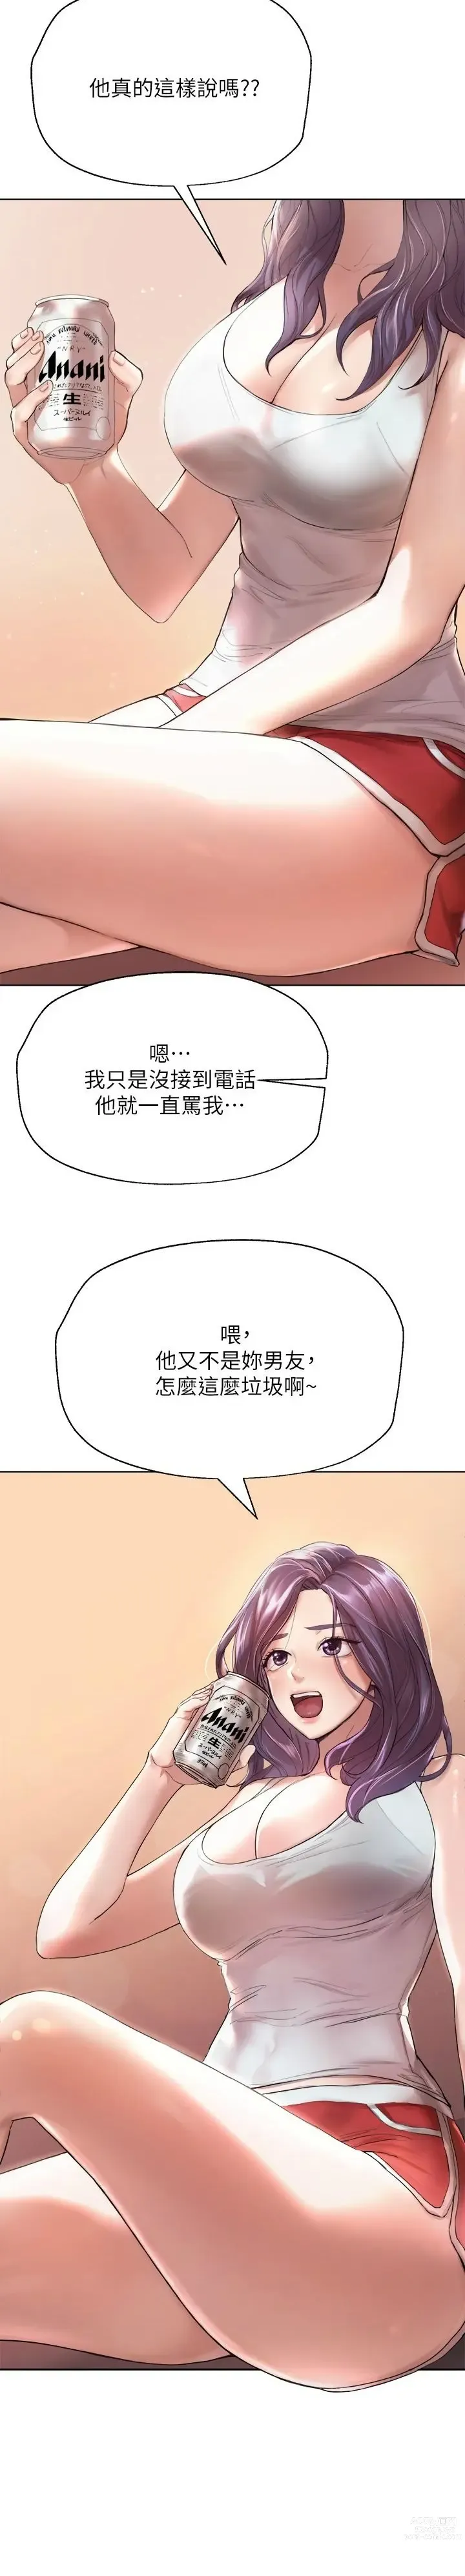 Page 3 of manga 姐姐们的调教／My Sister’s Friends